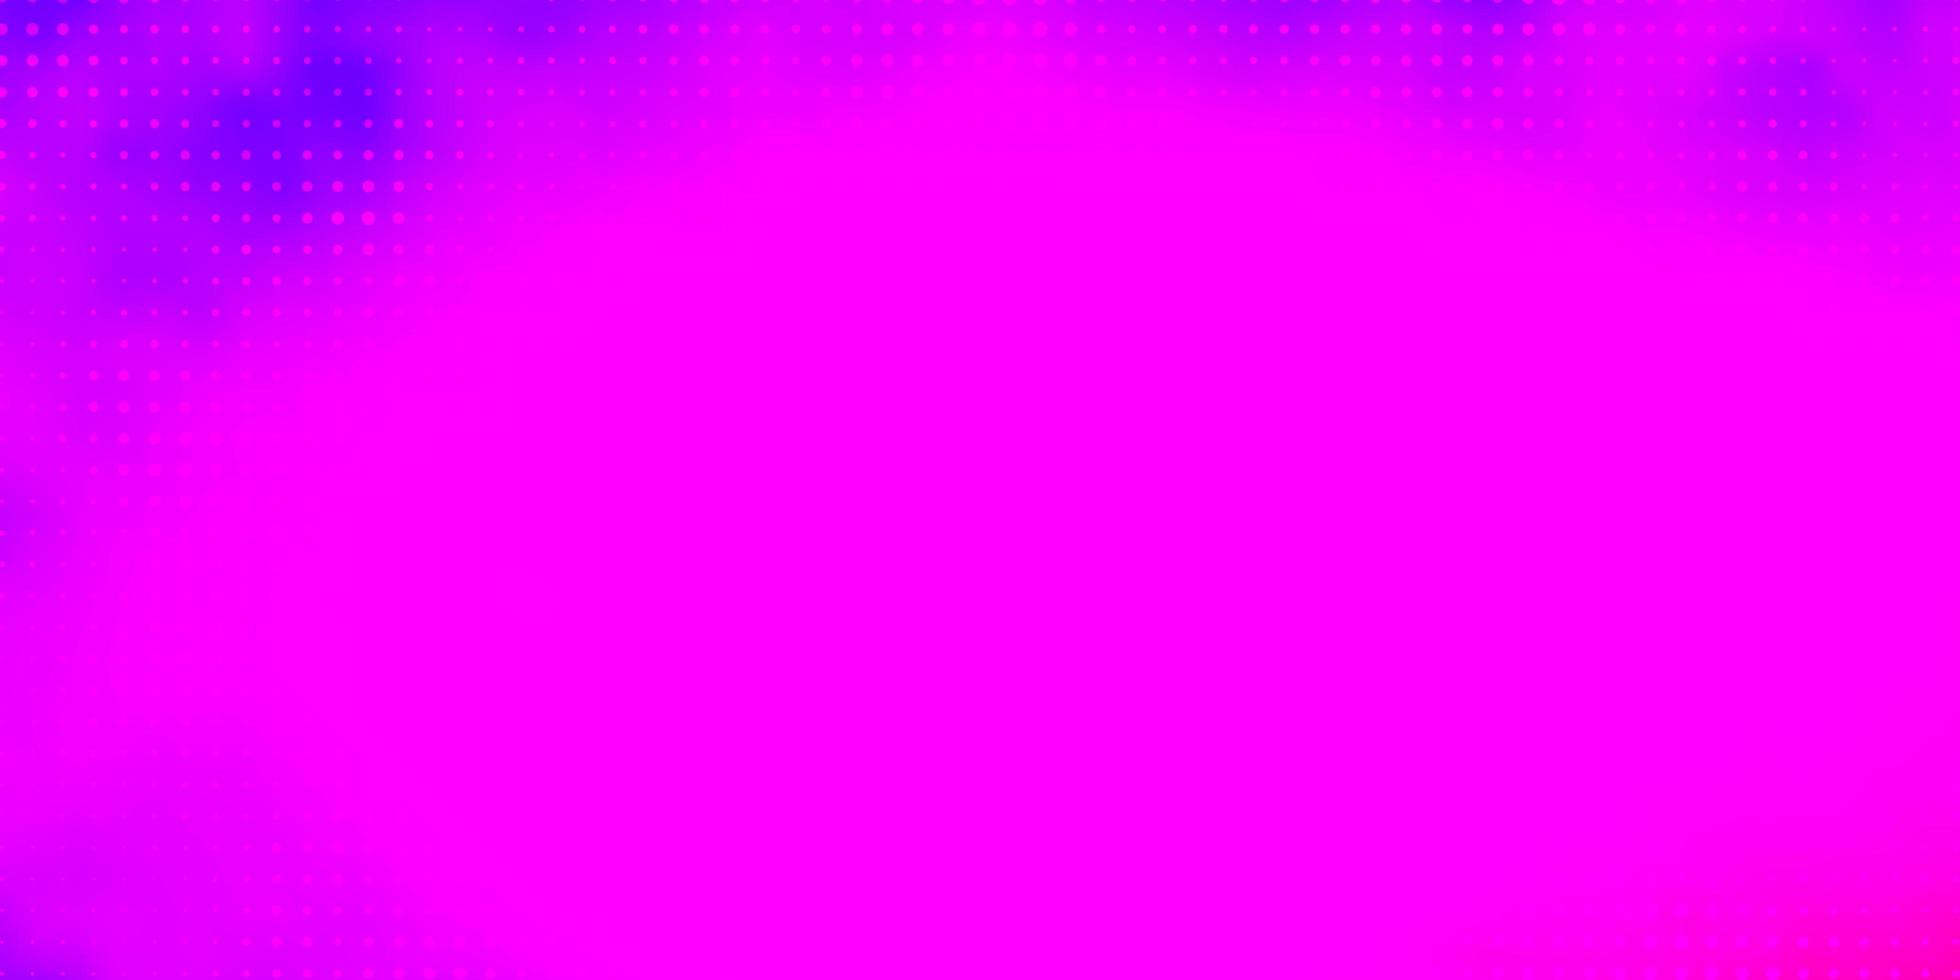 Light Purple, Pink vector background with circles. Colorful illustration with gradient dots in nature style. Design for your commercials.